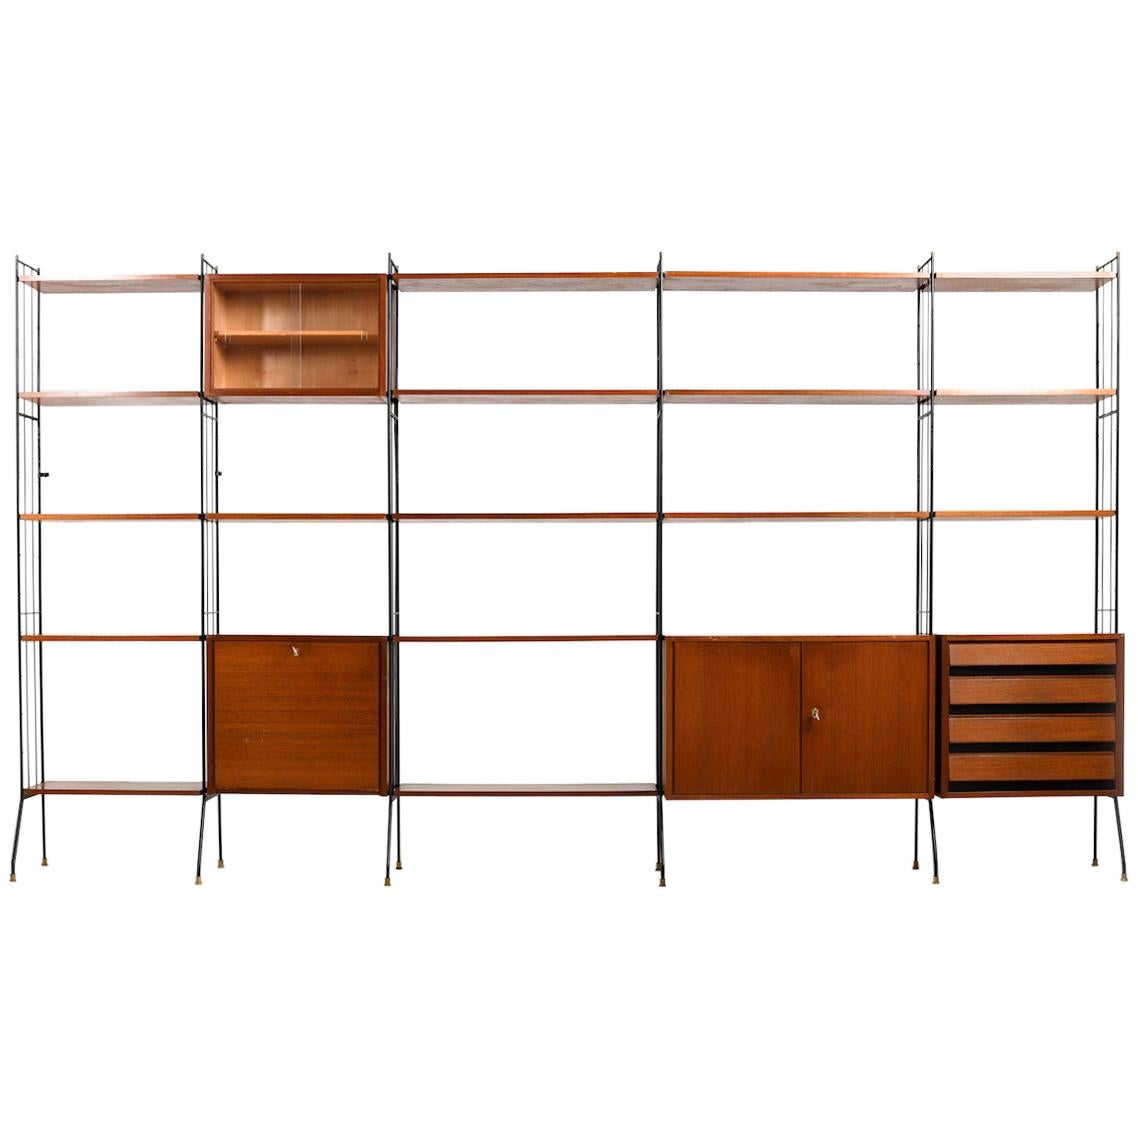 Early 1950s Shelf System with Bar in Teak / Incl. Extra Shelfes and Brackets